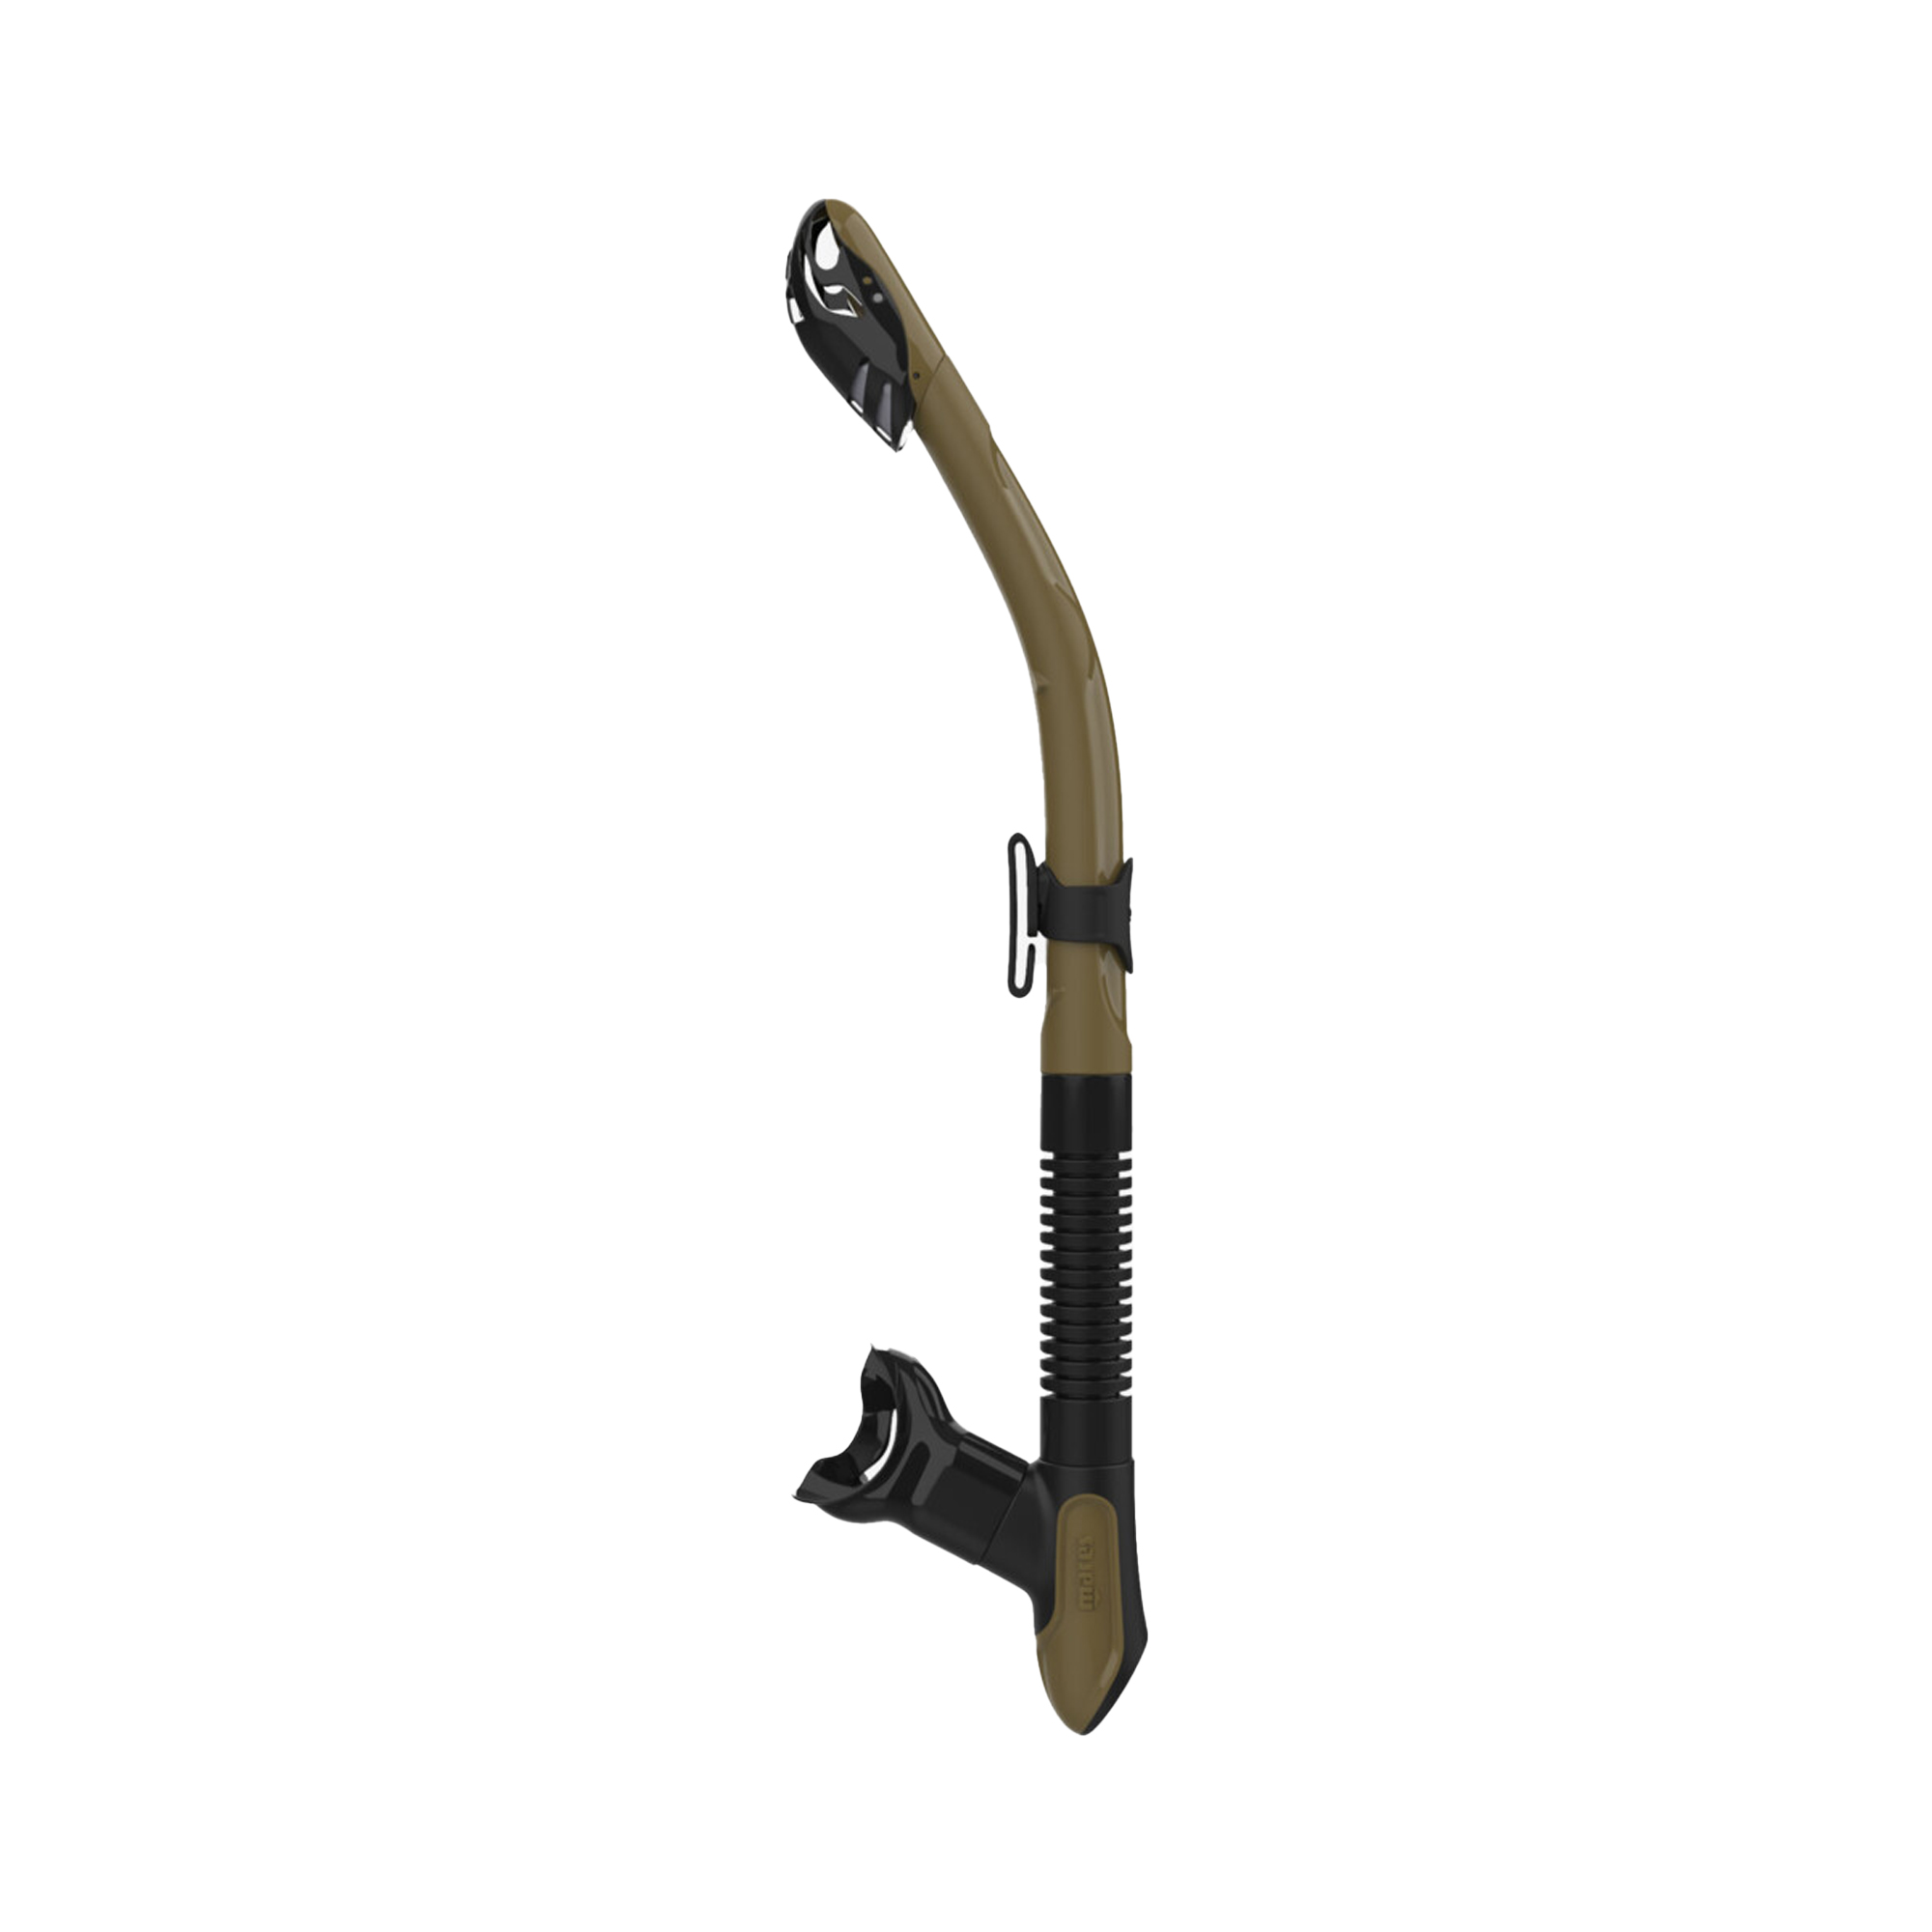 Mares Ergo Dry Snorkel with Exhaust Valve - olive and black